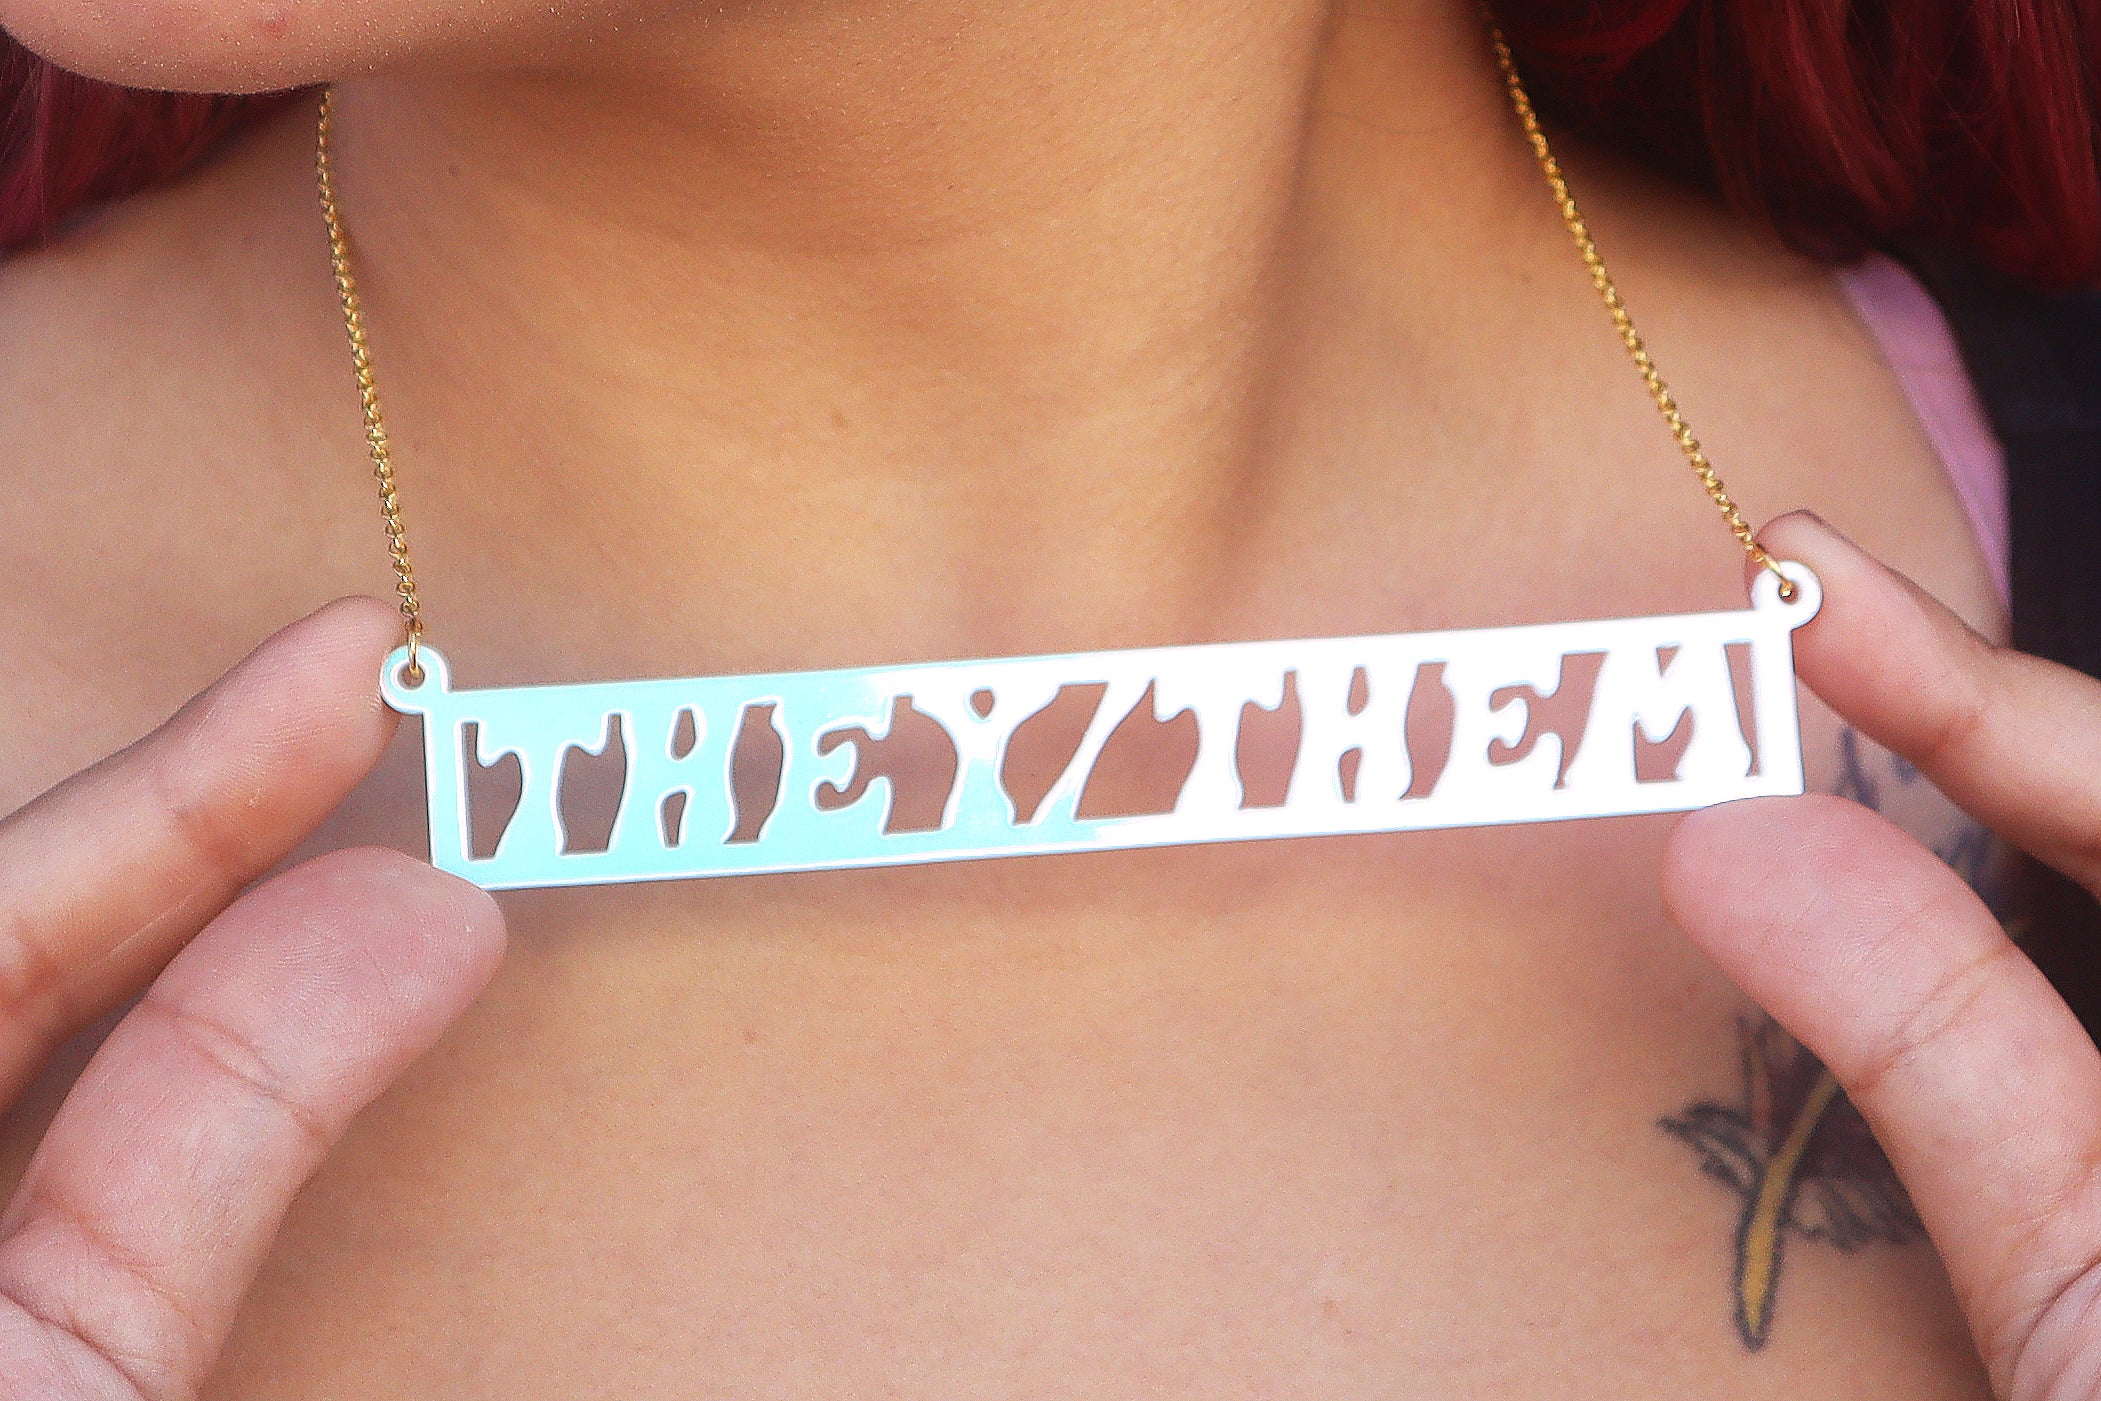 Amazon.com: Gender Neutral They Them Pronoun Necklace for Non-Binary :  Handmade Products